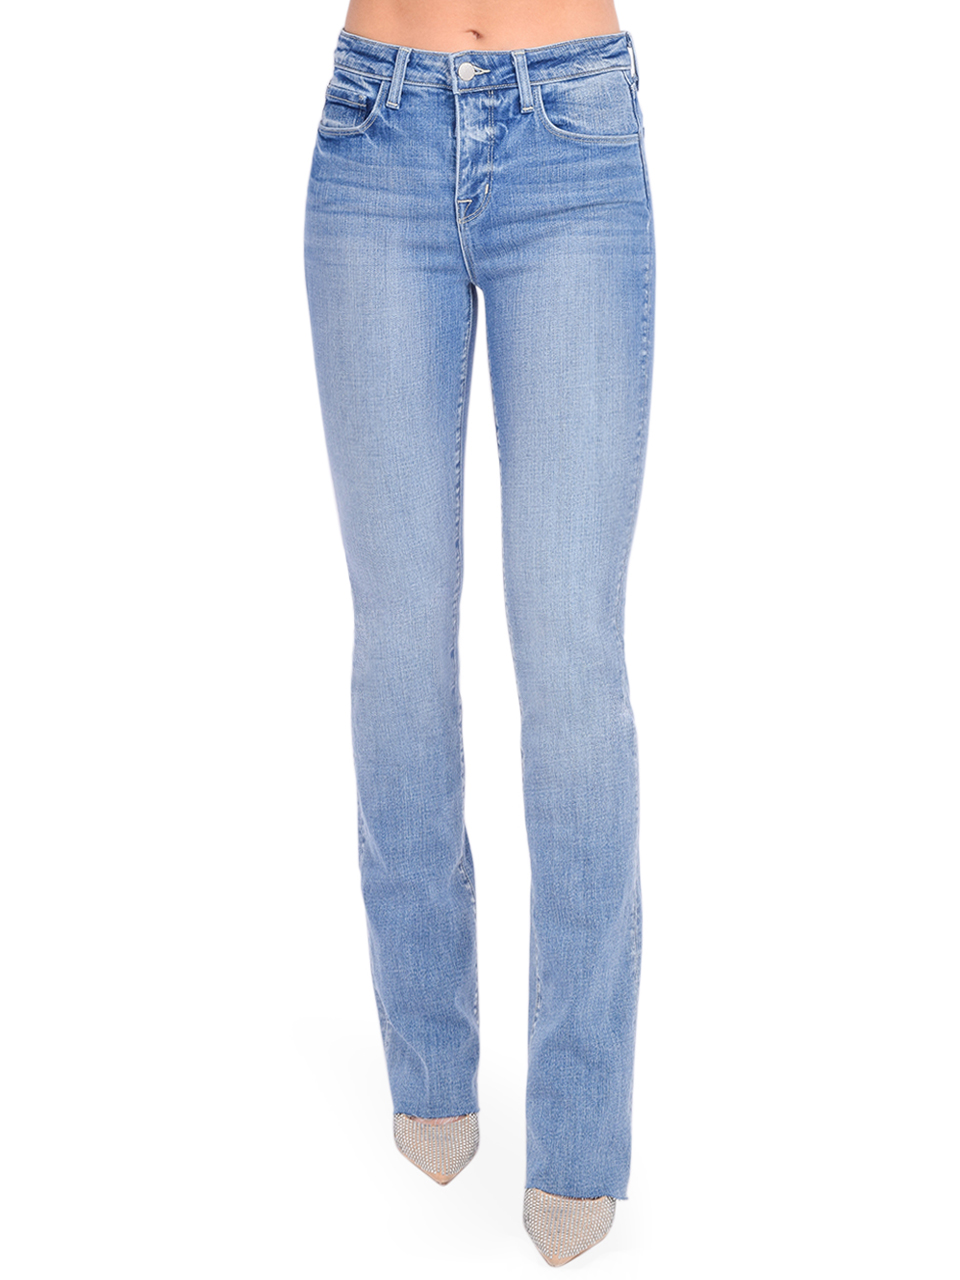 L'AGENCE Ruth High Rise Straight Jean in Tuscany Front View 